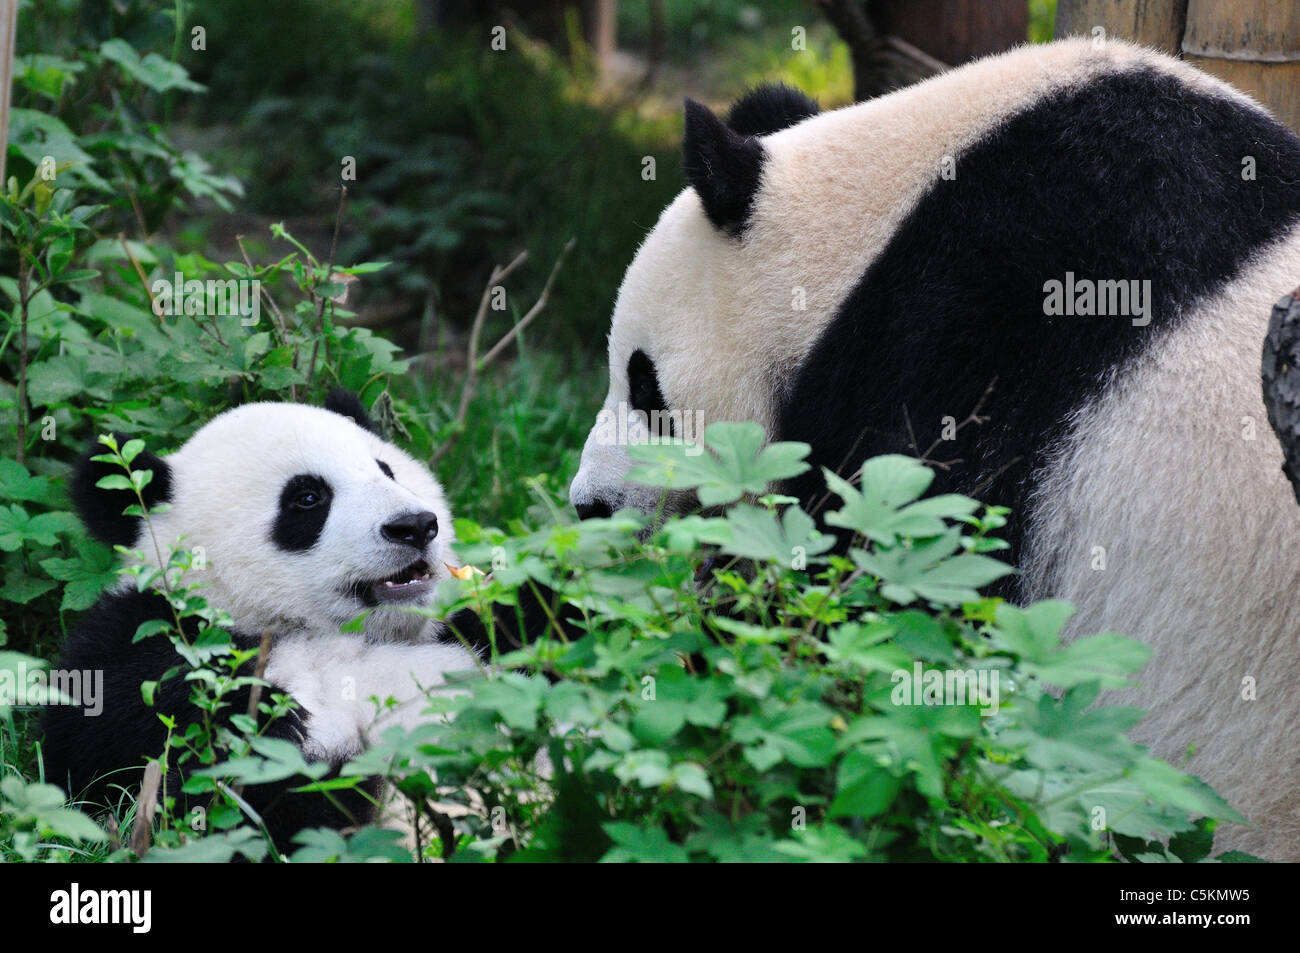 A giant panda mother and cub playing in grass. Chengdu, Sichuan, China. Stock Photo